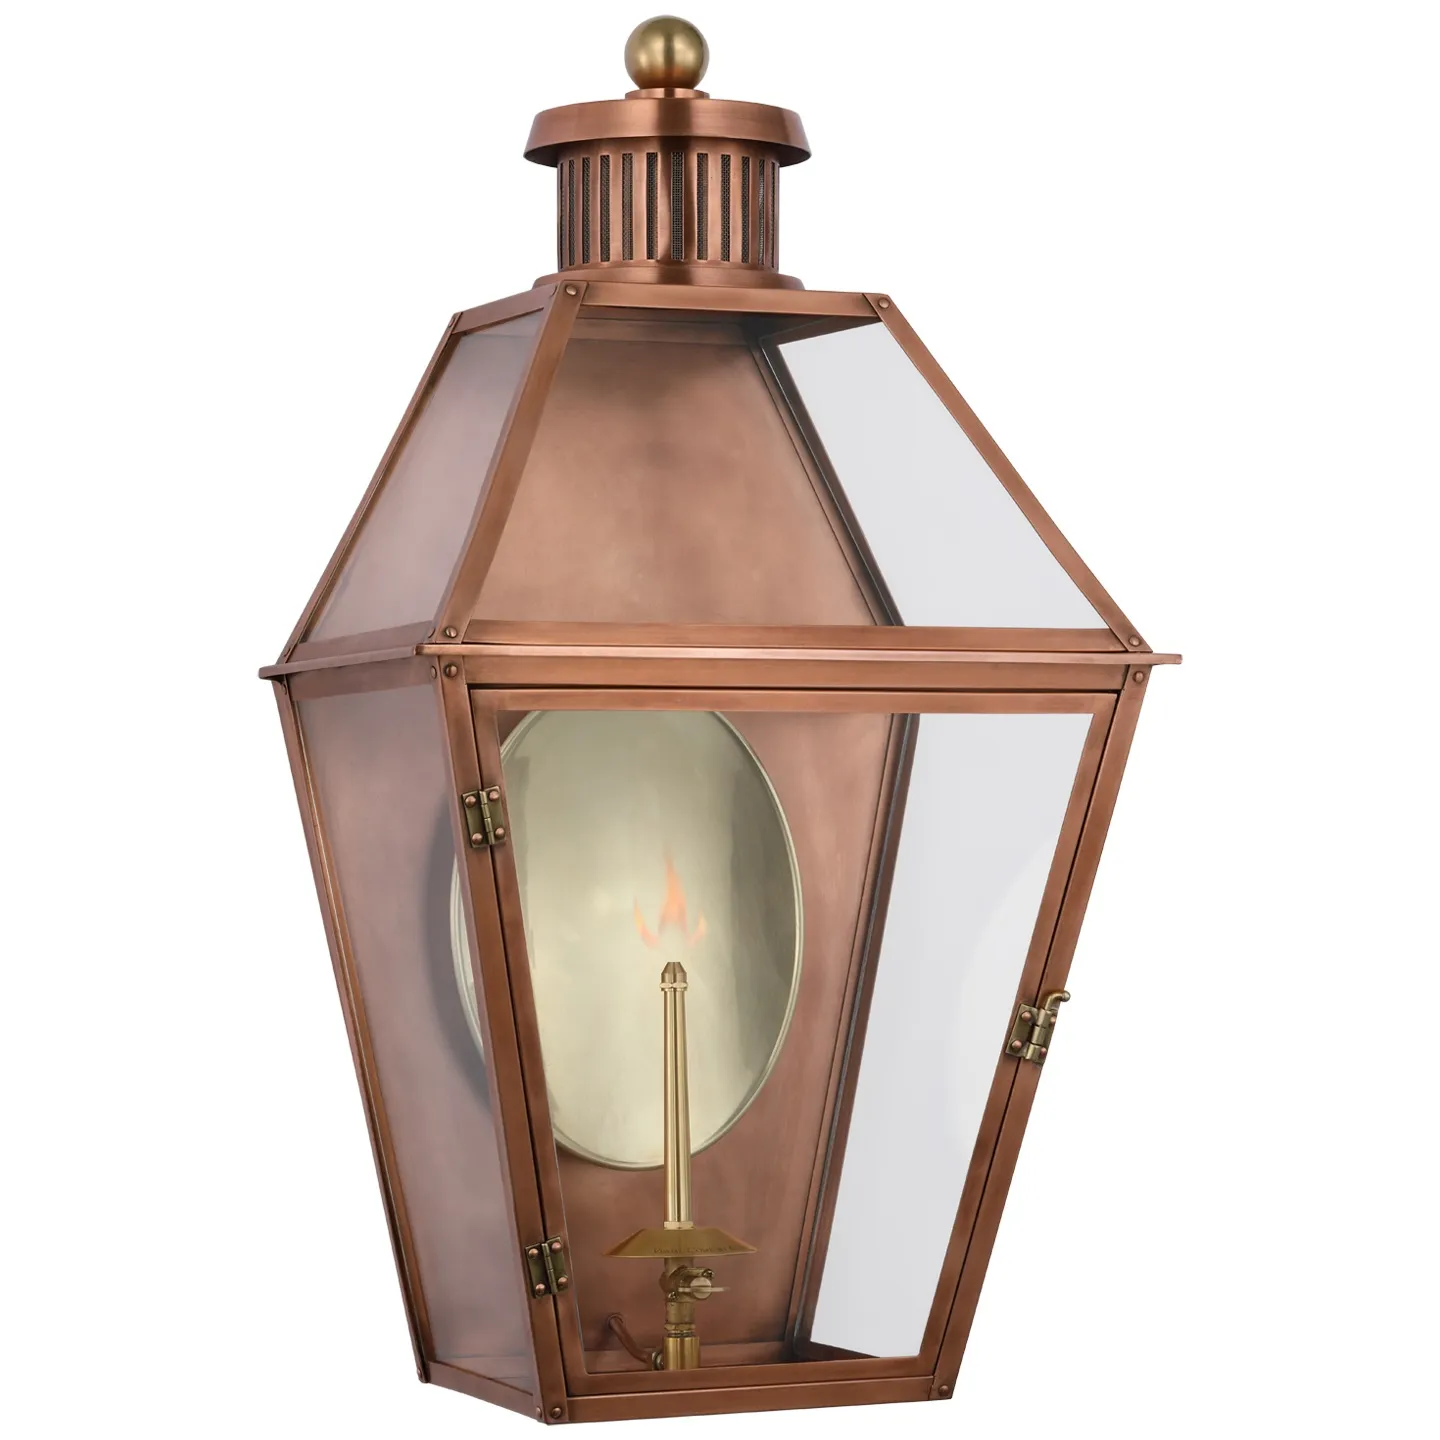 Stratford Small 3/4 Gas Wall Lantern in Soft Copper with Clear Glass